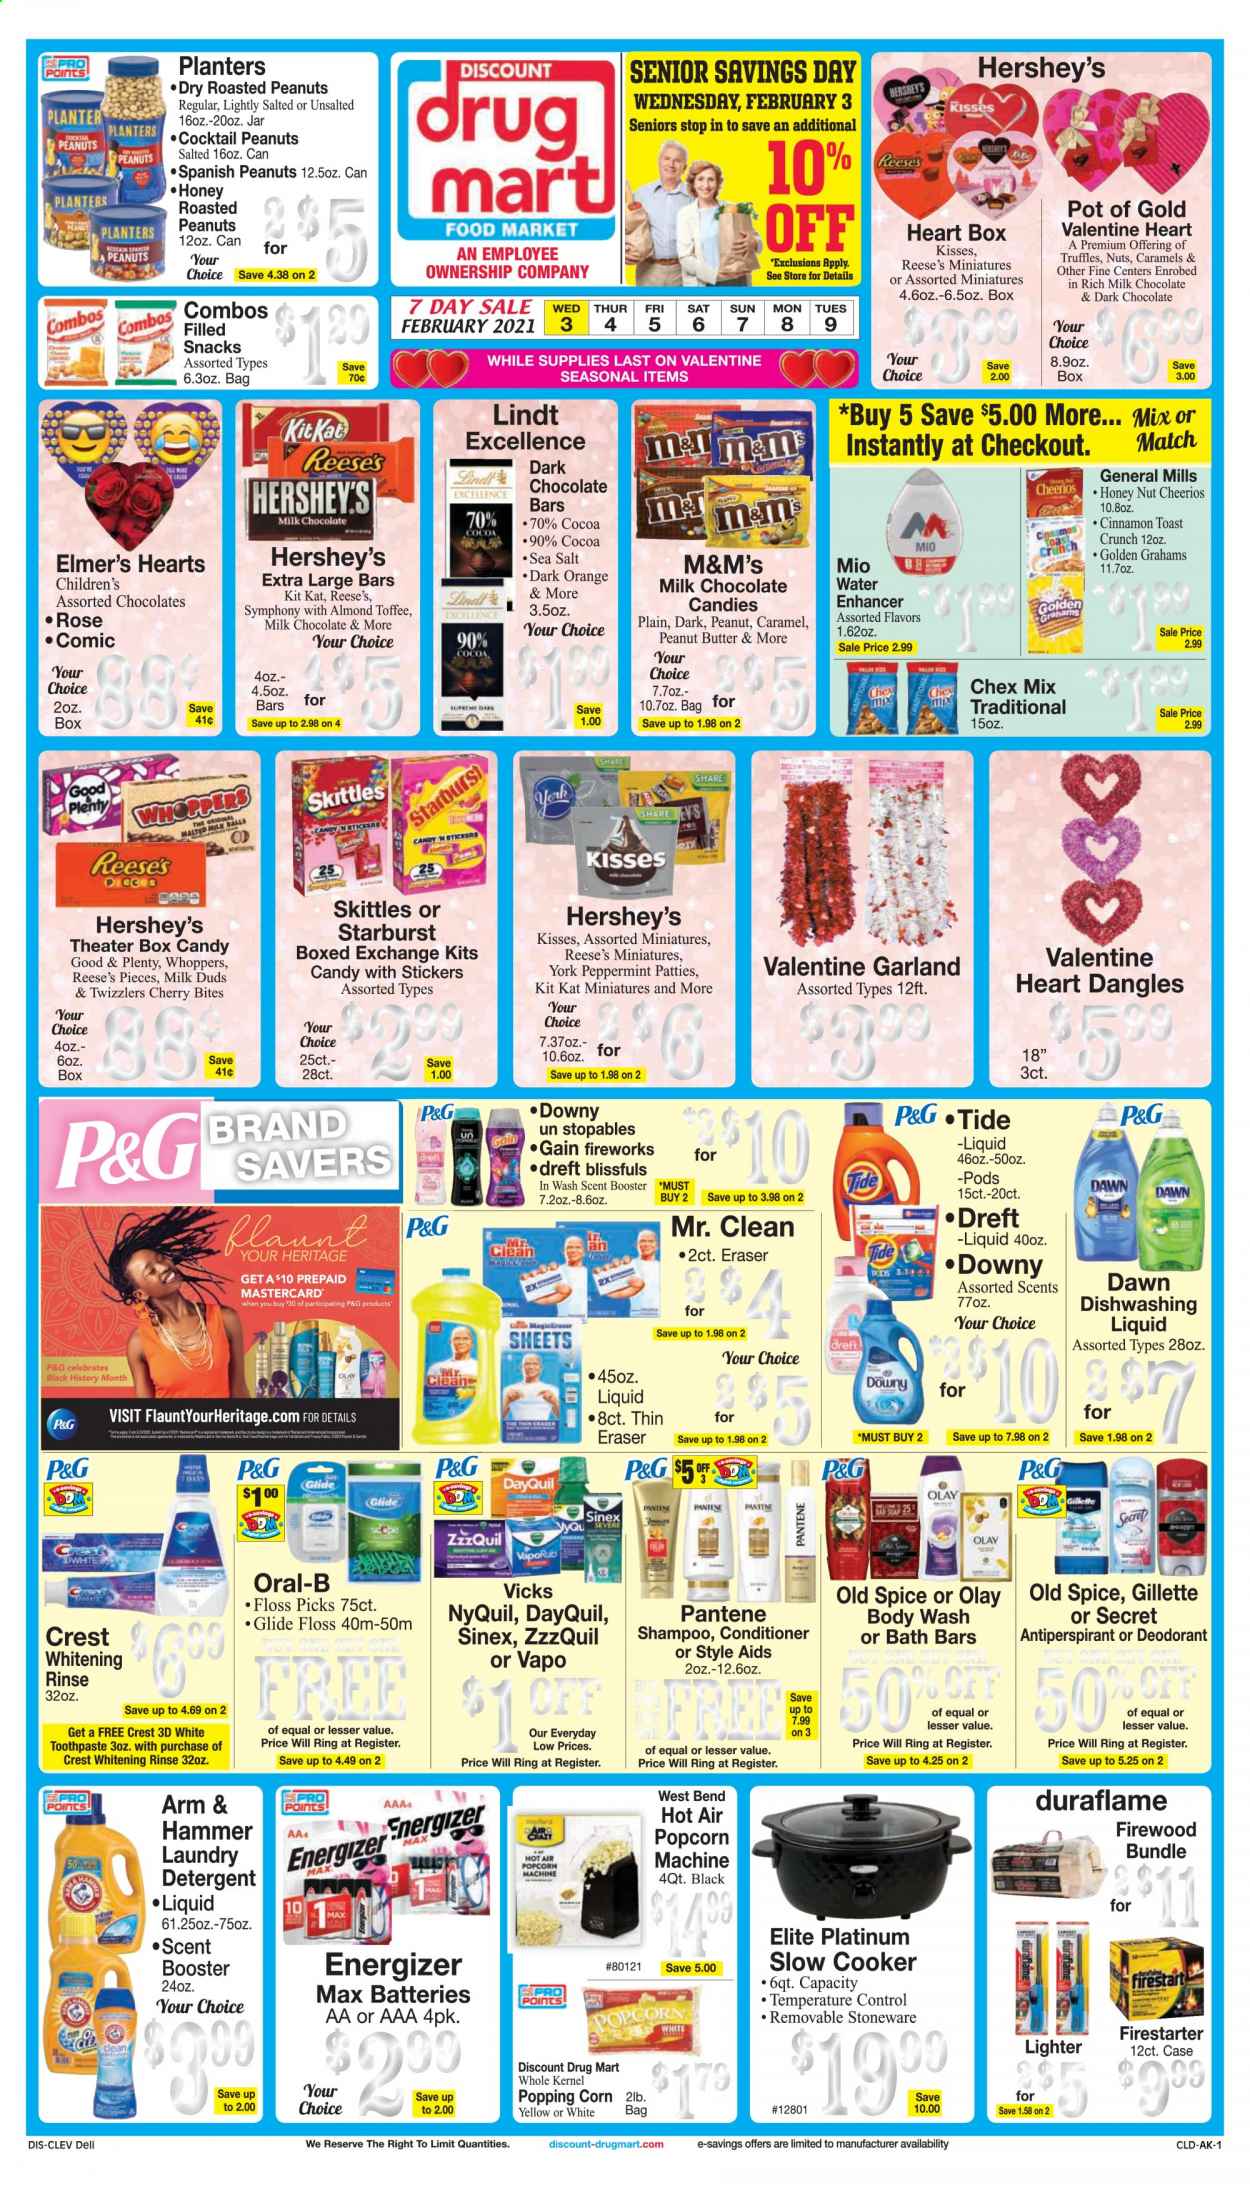 thumbnail - Discount Drug Mart Flyer - 02/03/2021 - 02/09/2021 - Sales products - toast bread, oranges, Reese's, Hershey's, corn, milk chocolate, Milk Duds, Lindt, truffles, KitKat, toffee, M&M's, dark chocolate, Skittles, chocolate candies, Starburst, snack, Chex Mix, ARM & HAMMER, cocoa, sea salt, Cheerios, cinnamon, caramel, peanut butter, roasted peanuts, Planters, Plenty, detergent, Gain, Tide, laundry detergent, Gain Fireworks, dishwashing liquid, body wash, shampoo, Old Spice, Oral-B, toothpaste, Crest, Olay, conditioner, Pantene, anti-perspirant, deodorant, Gillette, Vicks, pot, stoneware, eraser, battery, Energizer, rose, DayQuil, ZzzQuil, NyQuil, VapoRub, Sinex. Page 1.